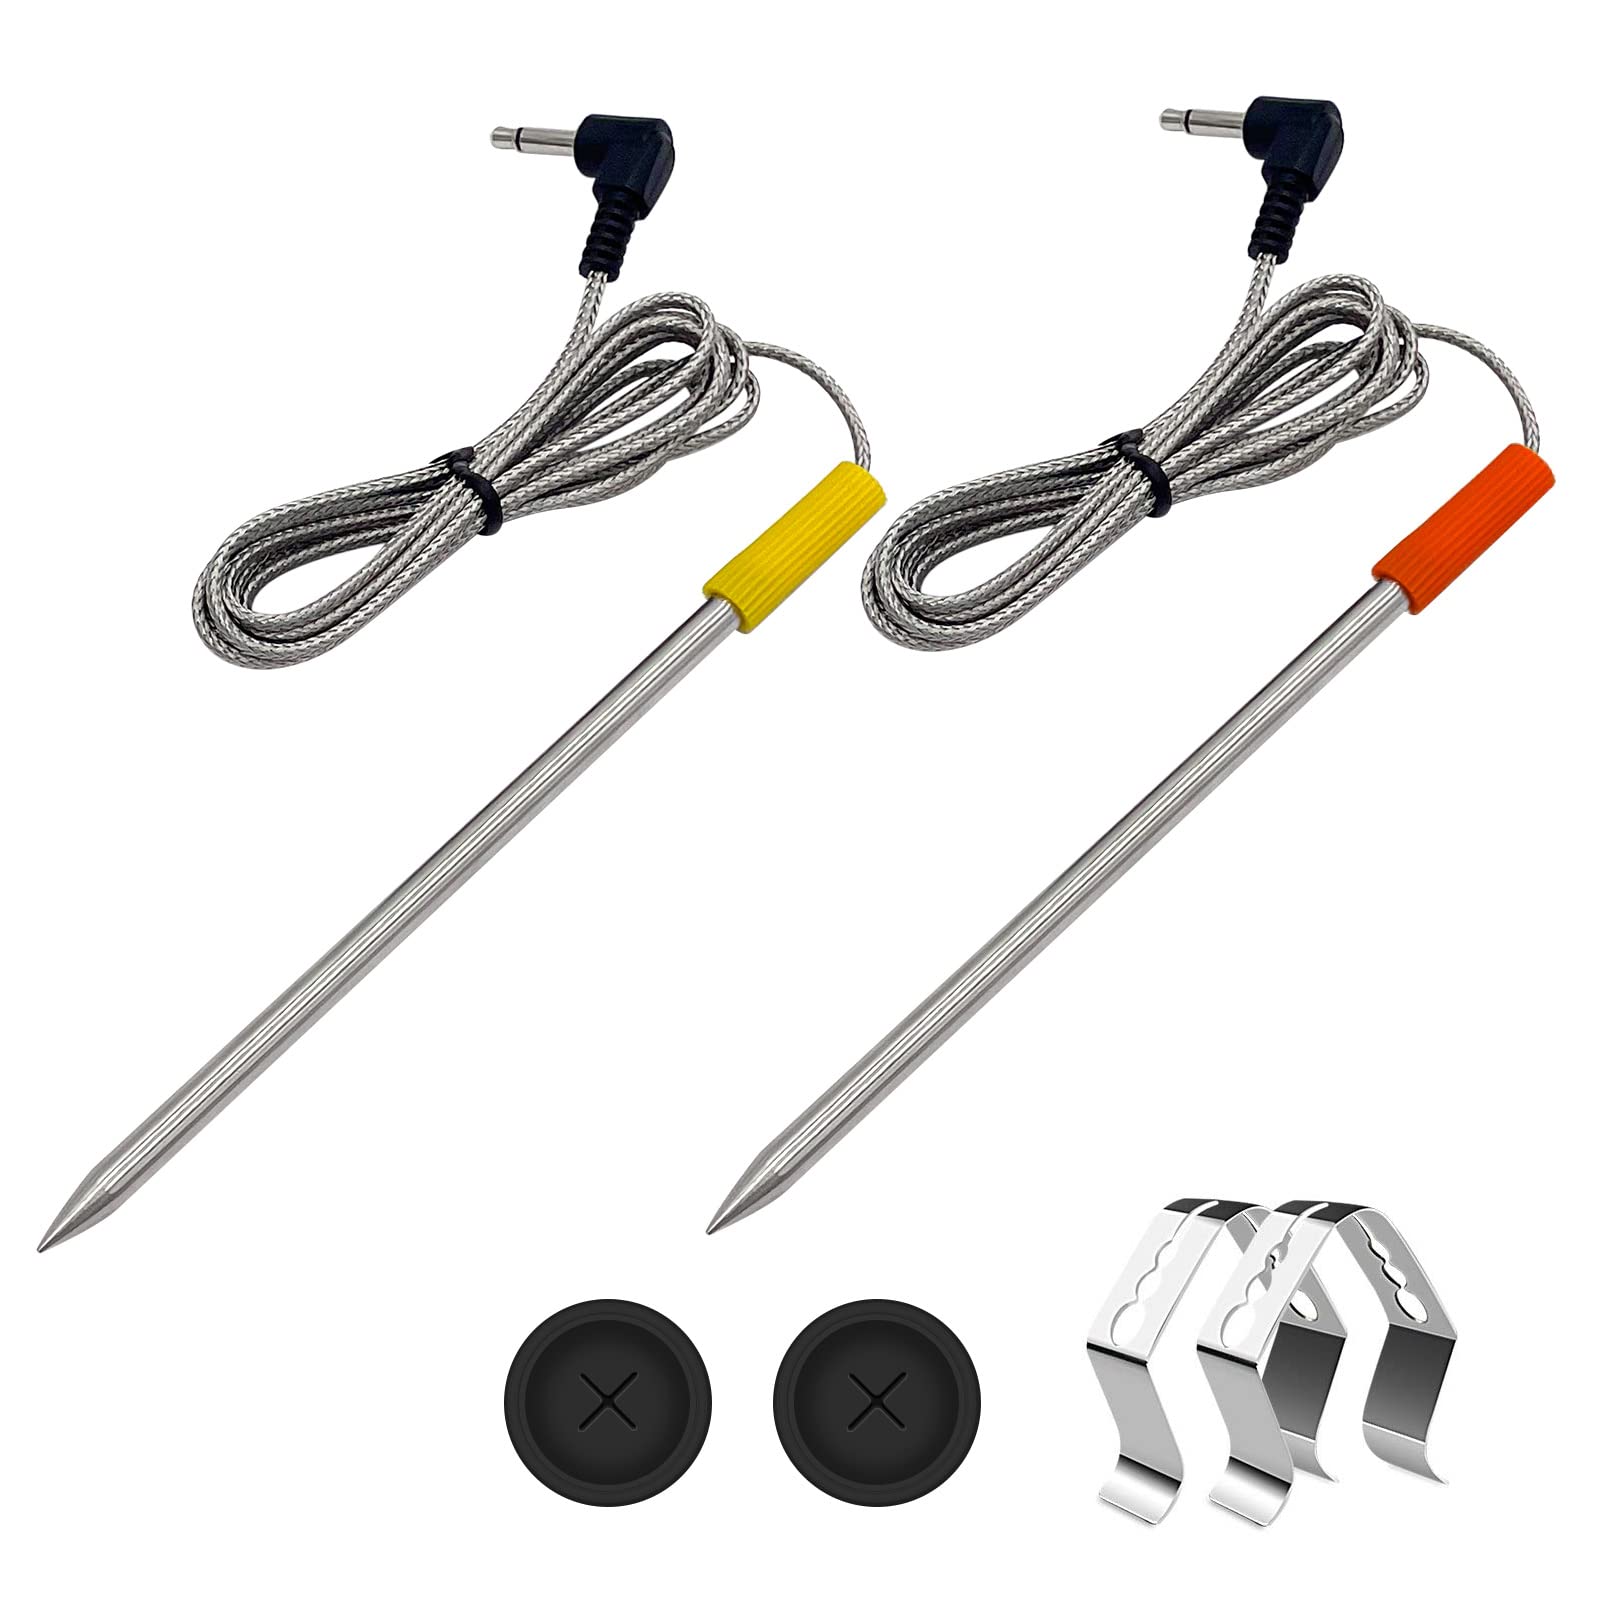 YAOAWE 2-Pack Meat Probe Replacement for Masterbuilt with Grill